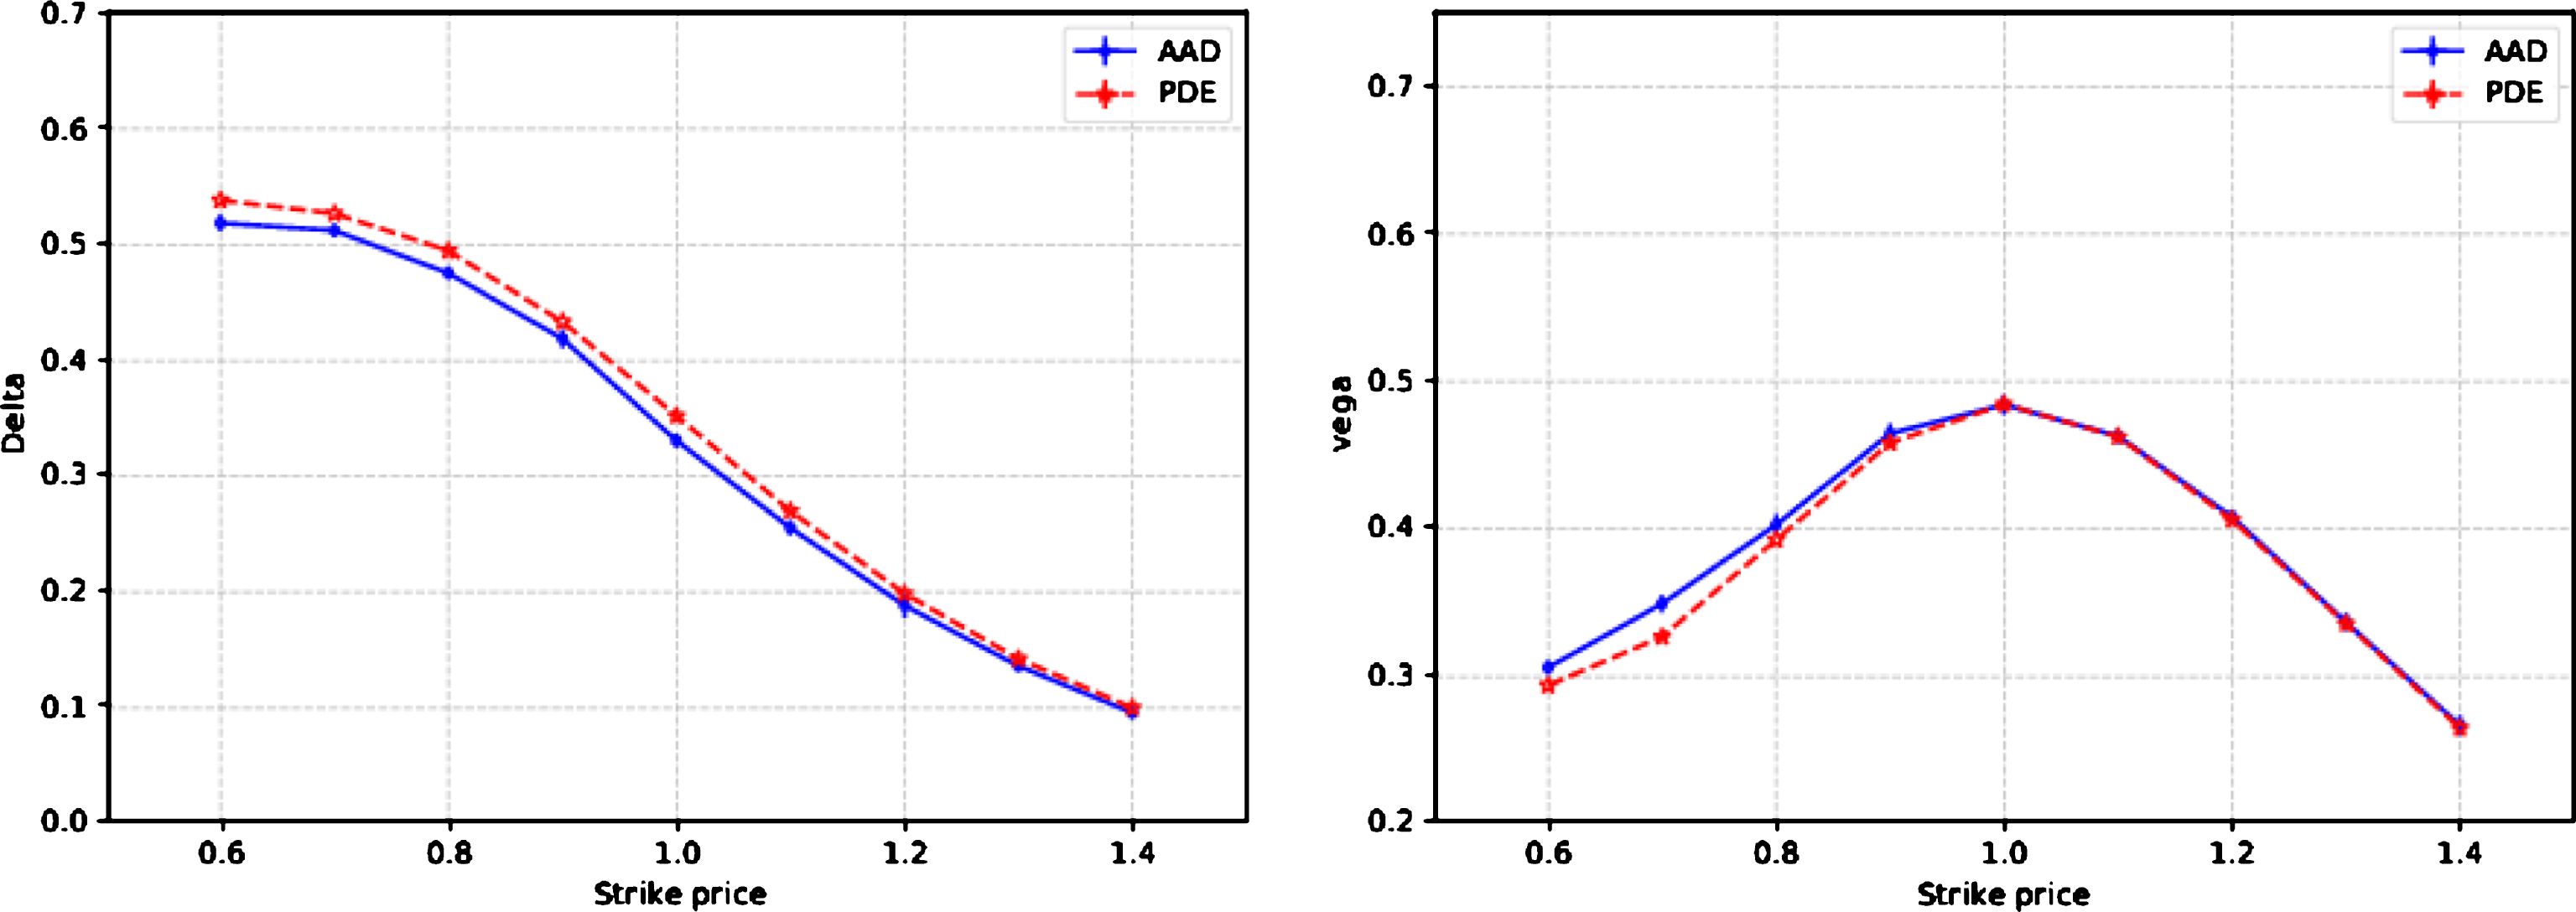 Deltas (left panel) and Vegas (right panel) for the Bermudan-style option in (80) as a function of strike. The smoothening parameter in the call spread regularization (48) is δ = 0.005. The number of MC paths is 400,000. The results are obtained with the setting (81) and (82). The MC uncertainty (in parenthesis) is computed using the binning technique with 20 bins for each set of simulations.